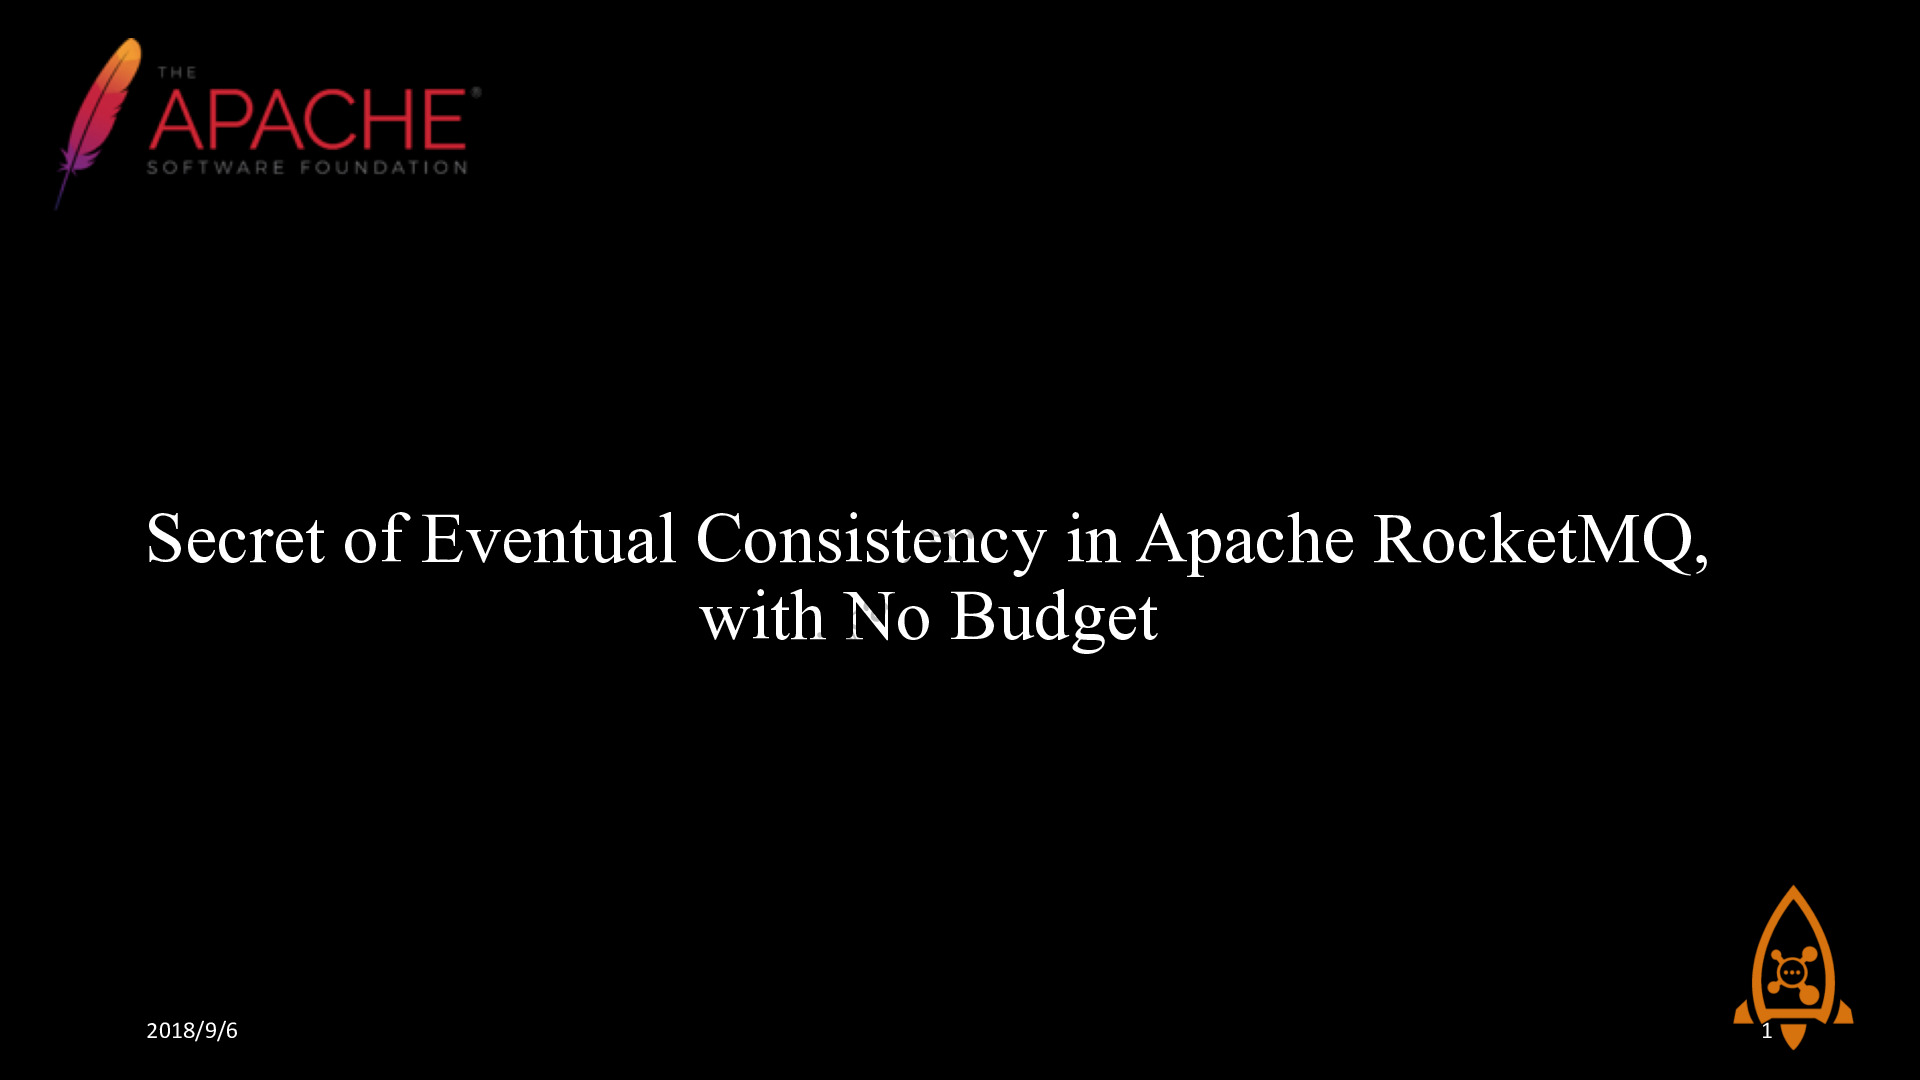 Aliware_Open_Source_北京站_PPT_Secret_of_Eventual_Consistency_in_Apache_RocketMQ_with_No_Budget_杜恒